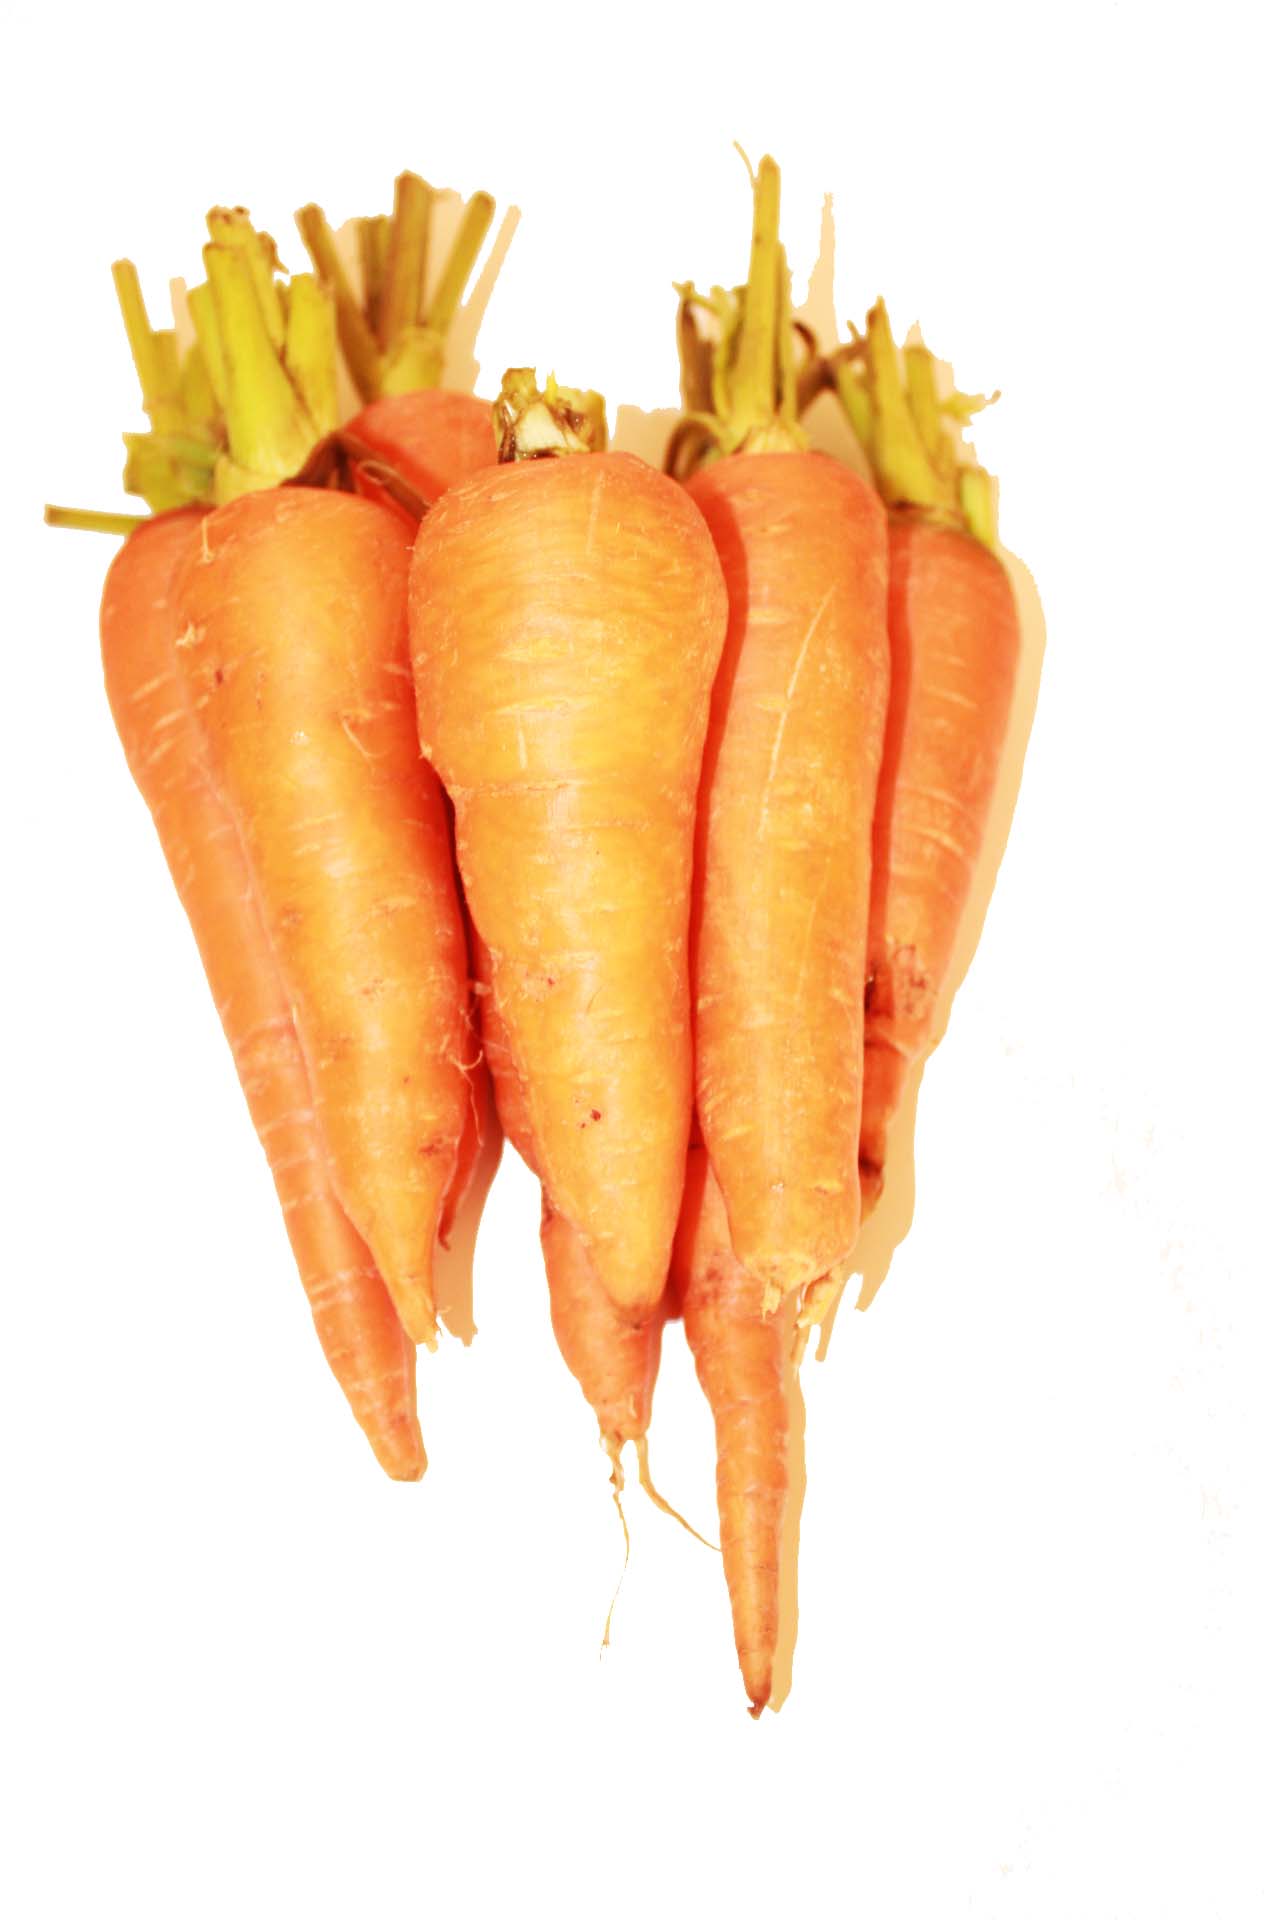 Locally Grown Carrot 1kg Package